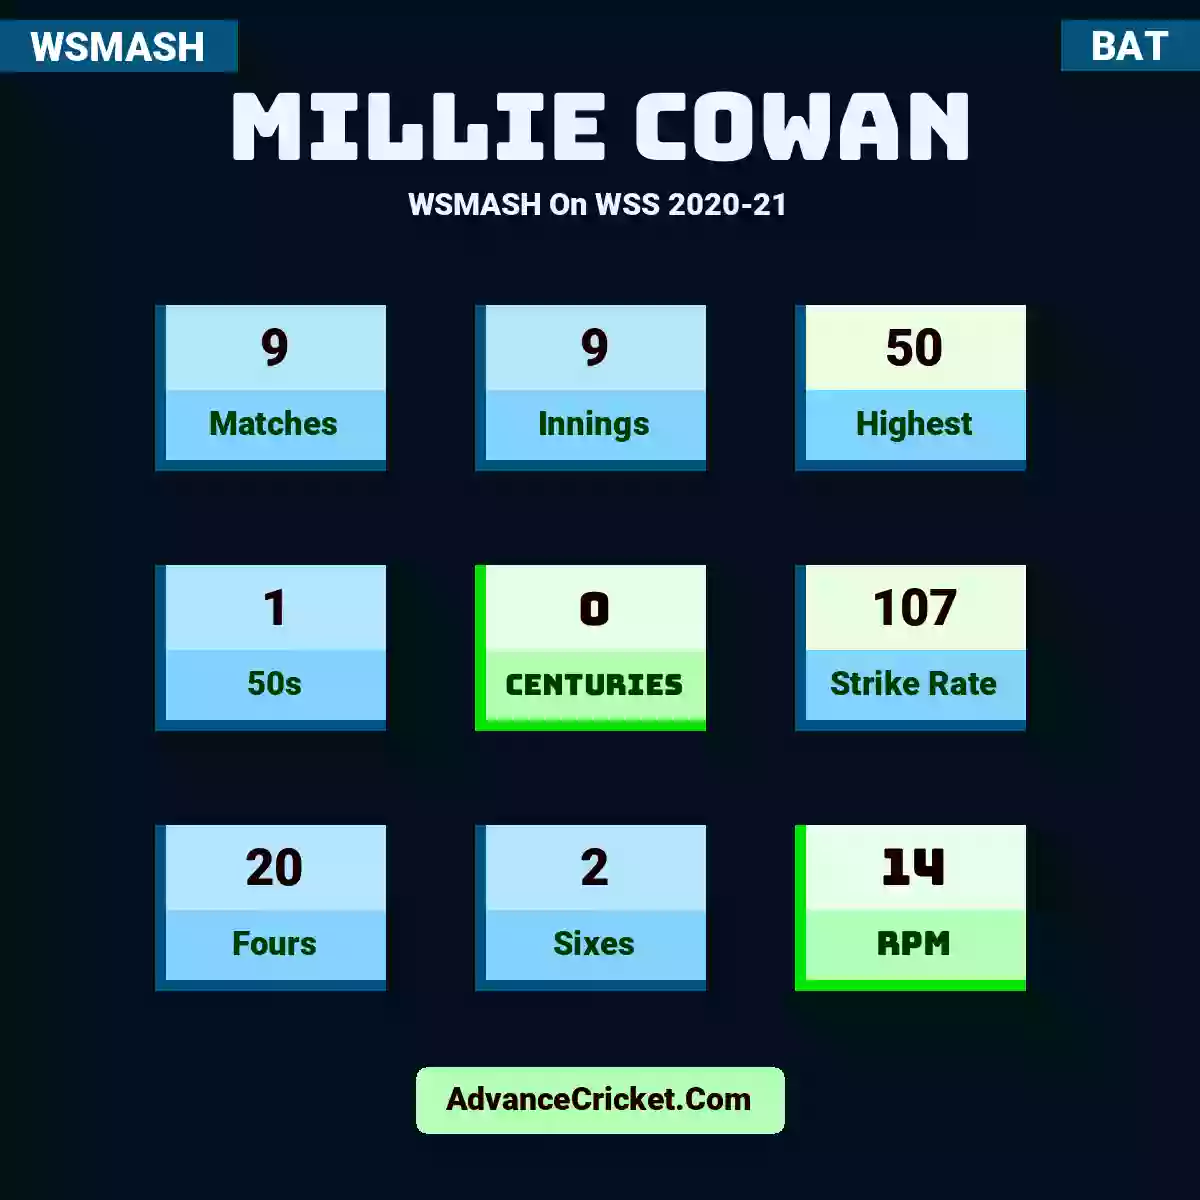 Millie Cowan WSMASH  On WSS 2020-21, Millie Cowan played 9 matches, scored 50 runs as highest, 1 half-centuries, and 0 centuries, with a strike rate of 107. M.Cowan hit 20 fours and 2 sixes, with an RPM of 14.